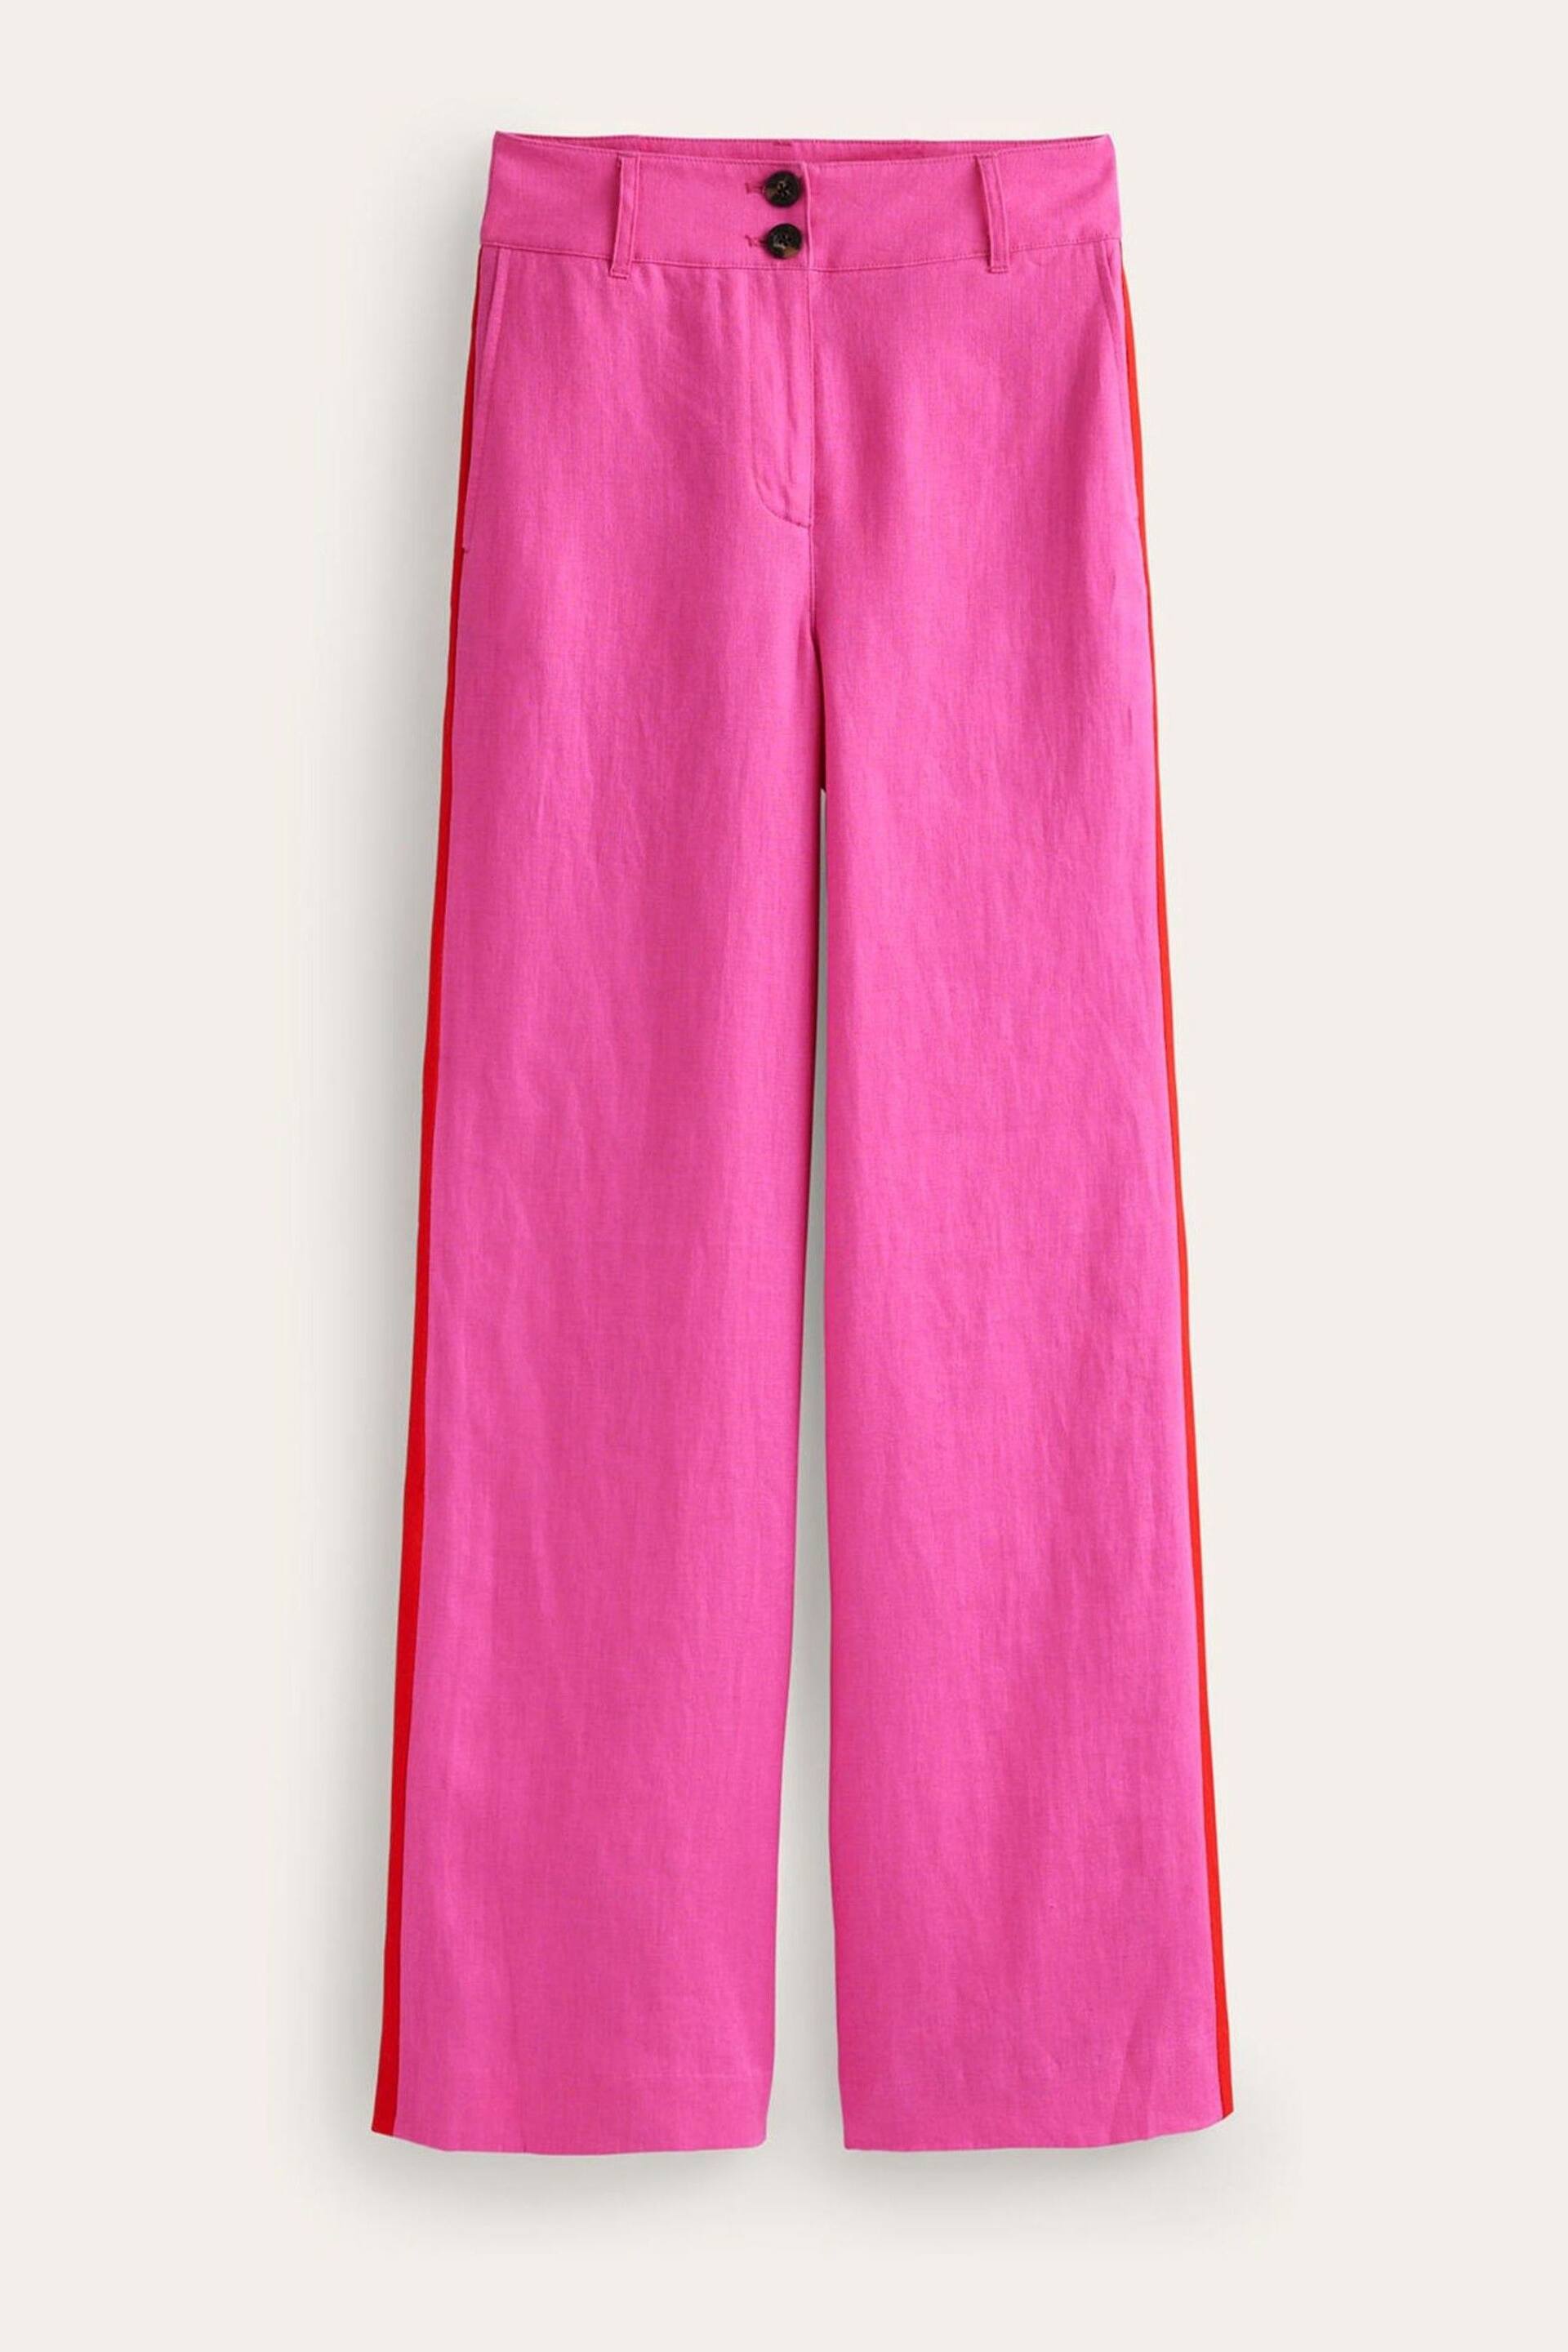 Boden Pink Westbourne Linen Trousers - Image 5 of 5